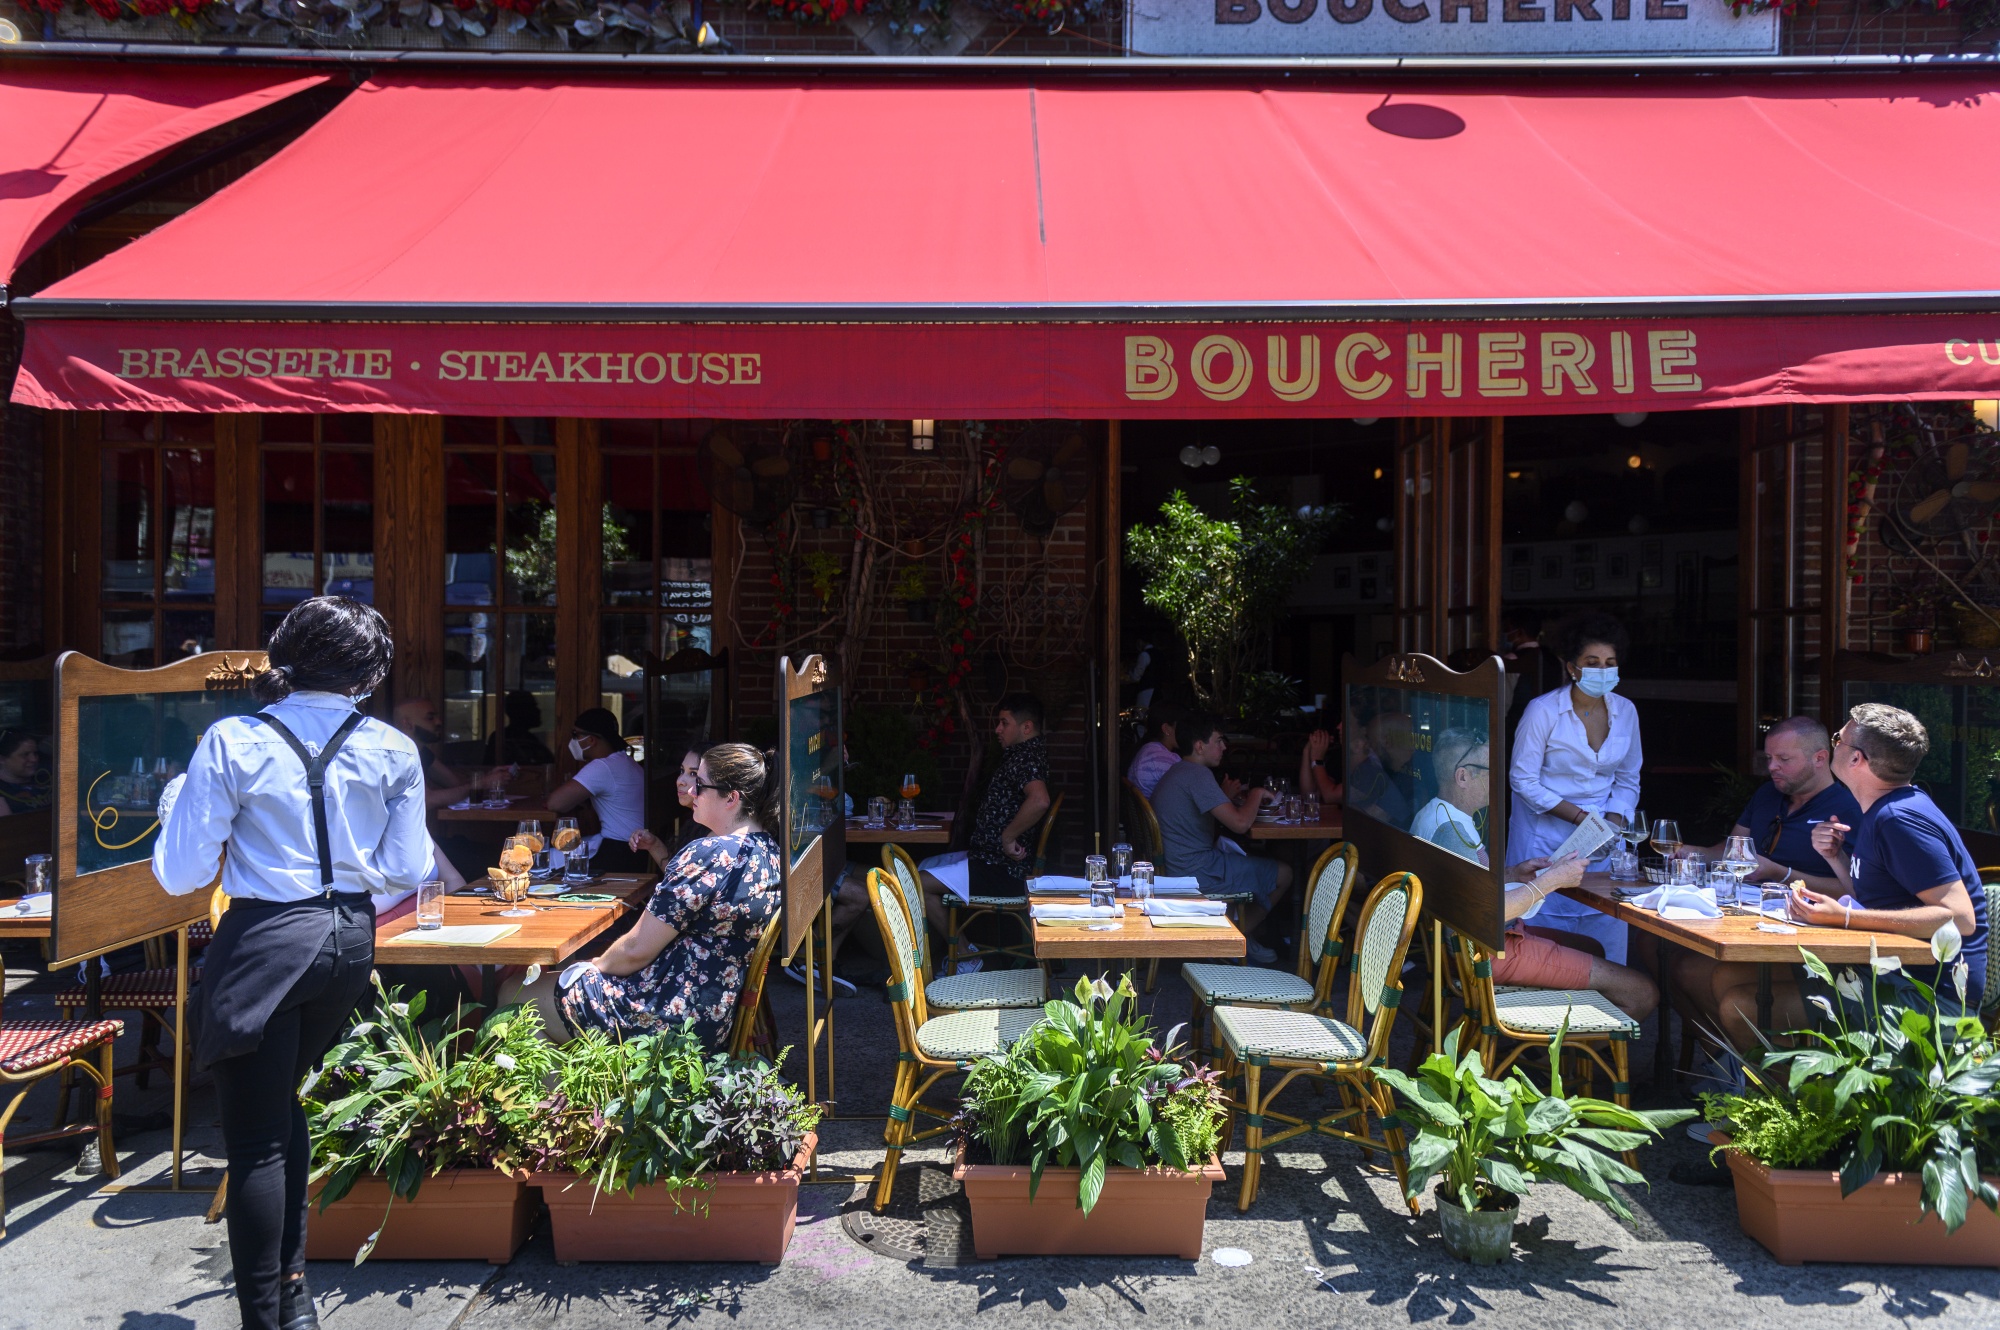 Servers wearing protective masks assist customers at tables outside of the Boucherie restaurant in the West Village neighborhood of New York.